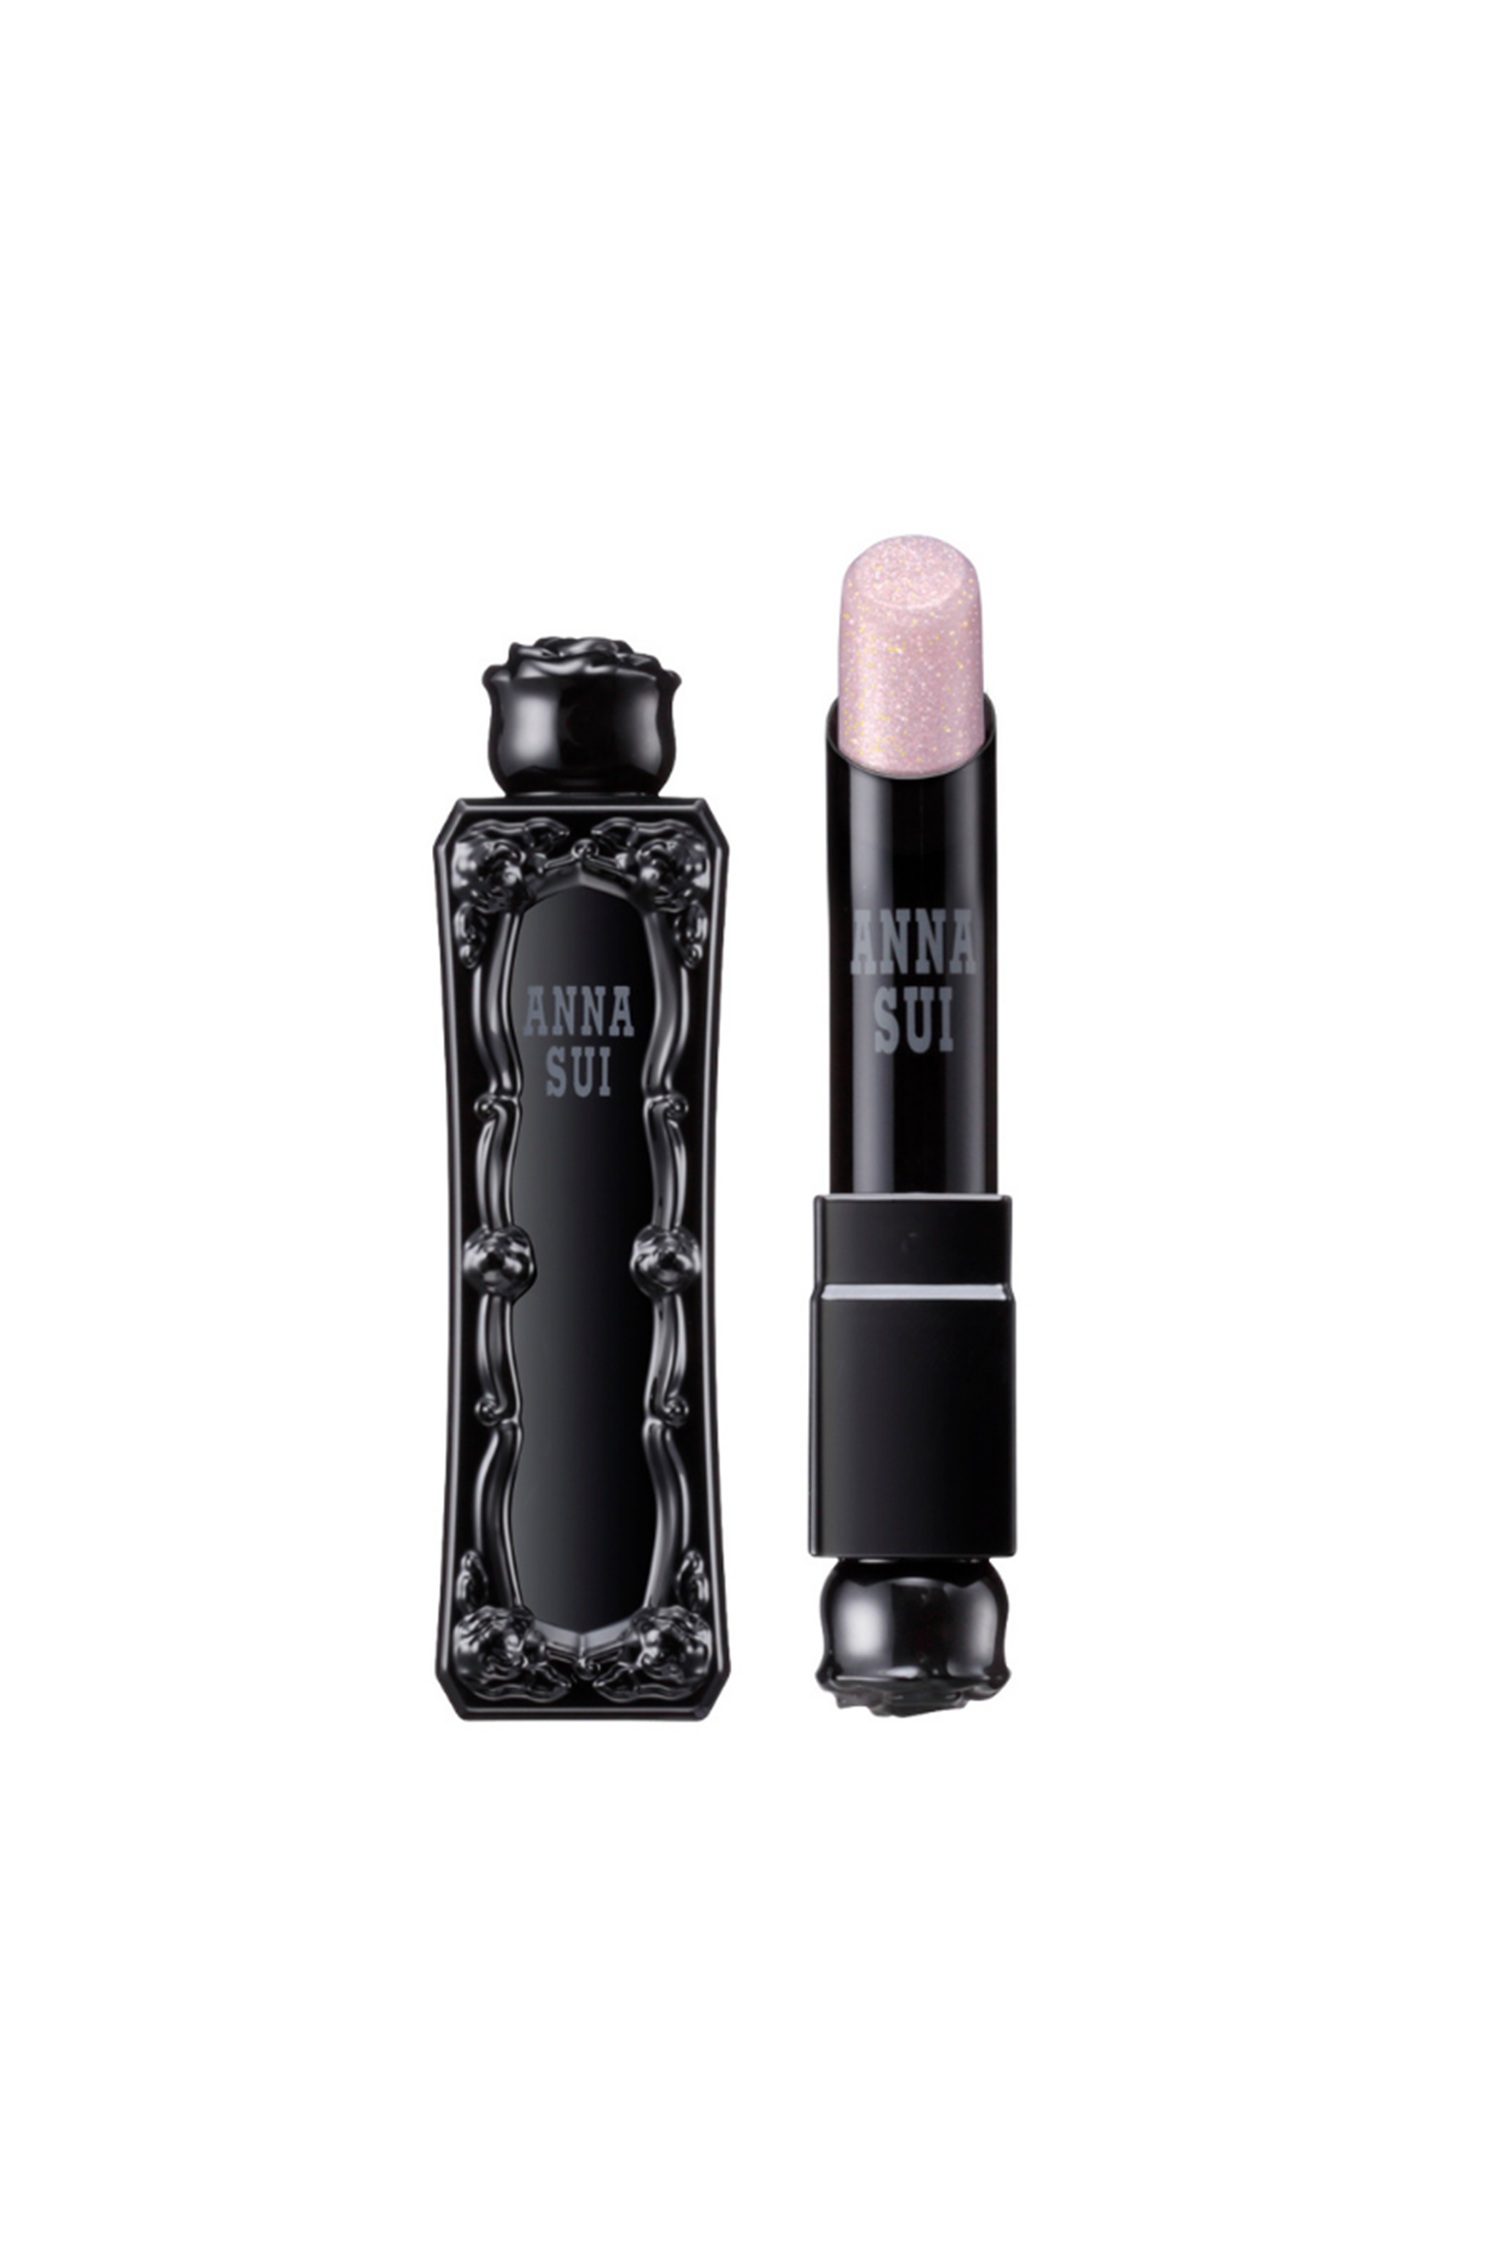 Sunshine Pink lipstick, in an Anna Sui, black container with raised rose pattern, rose on top 